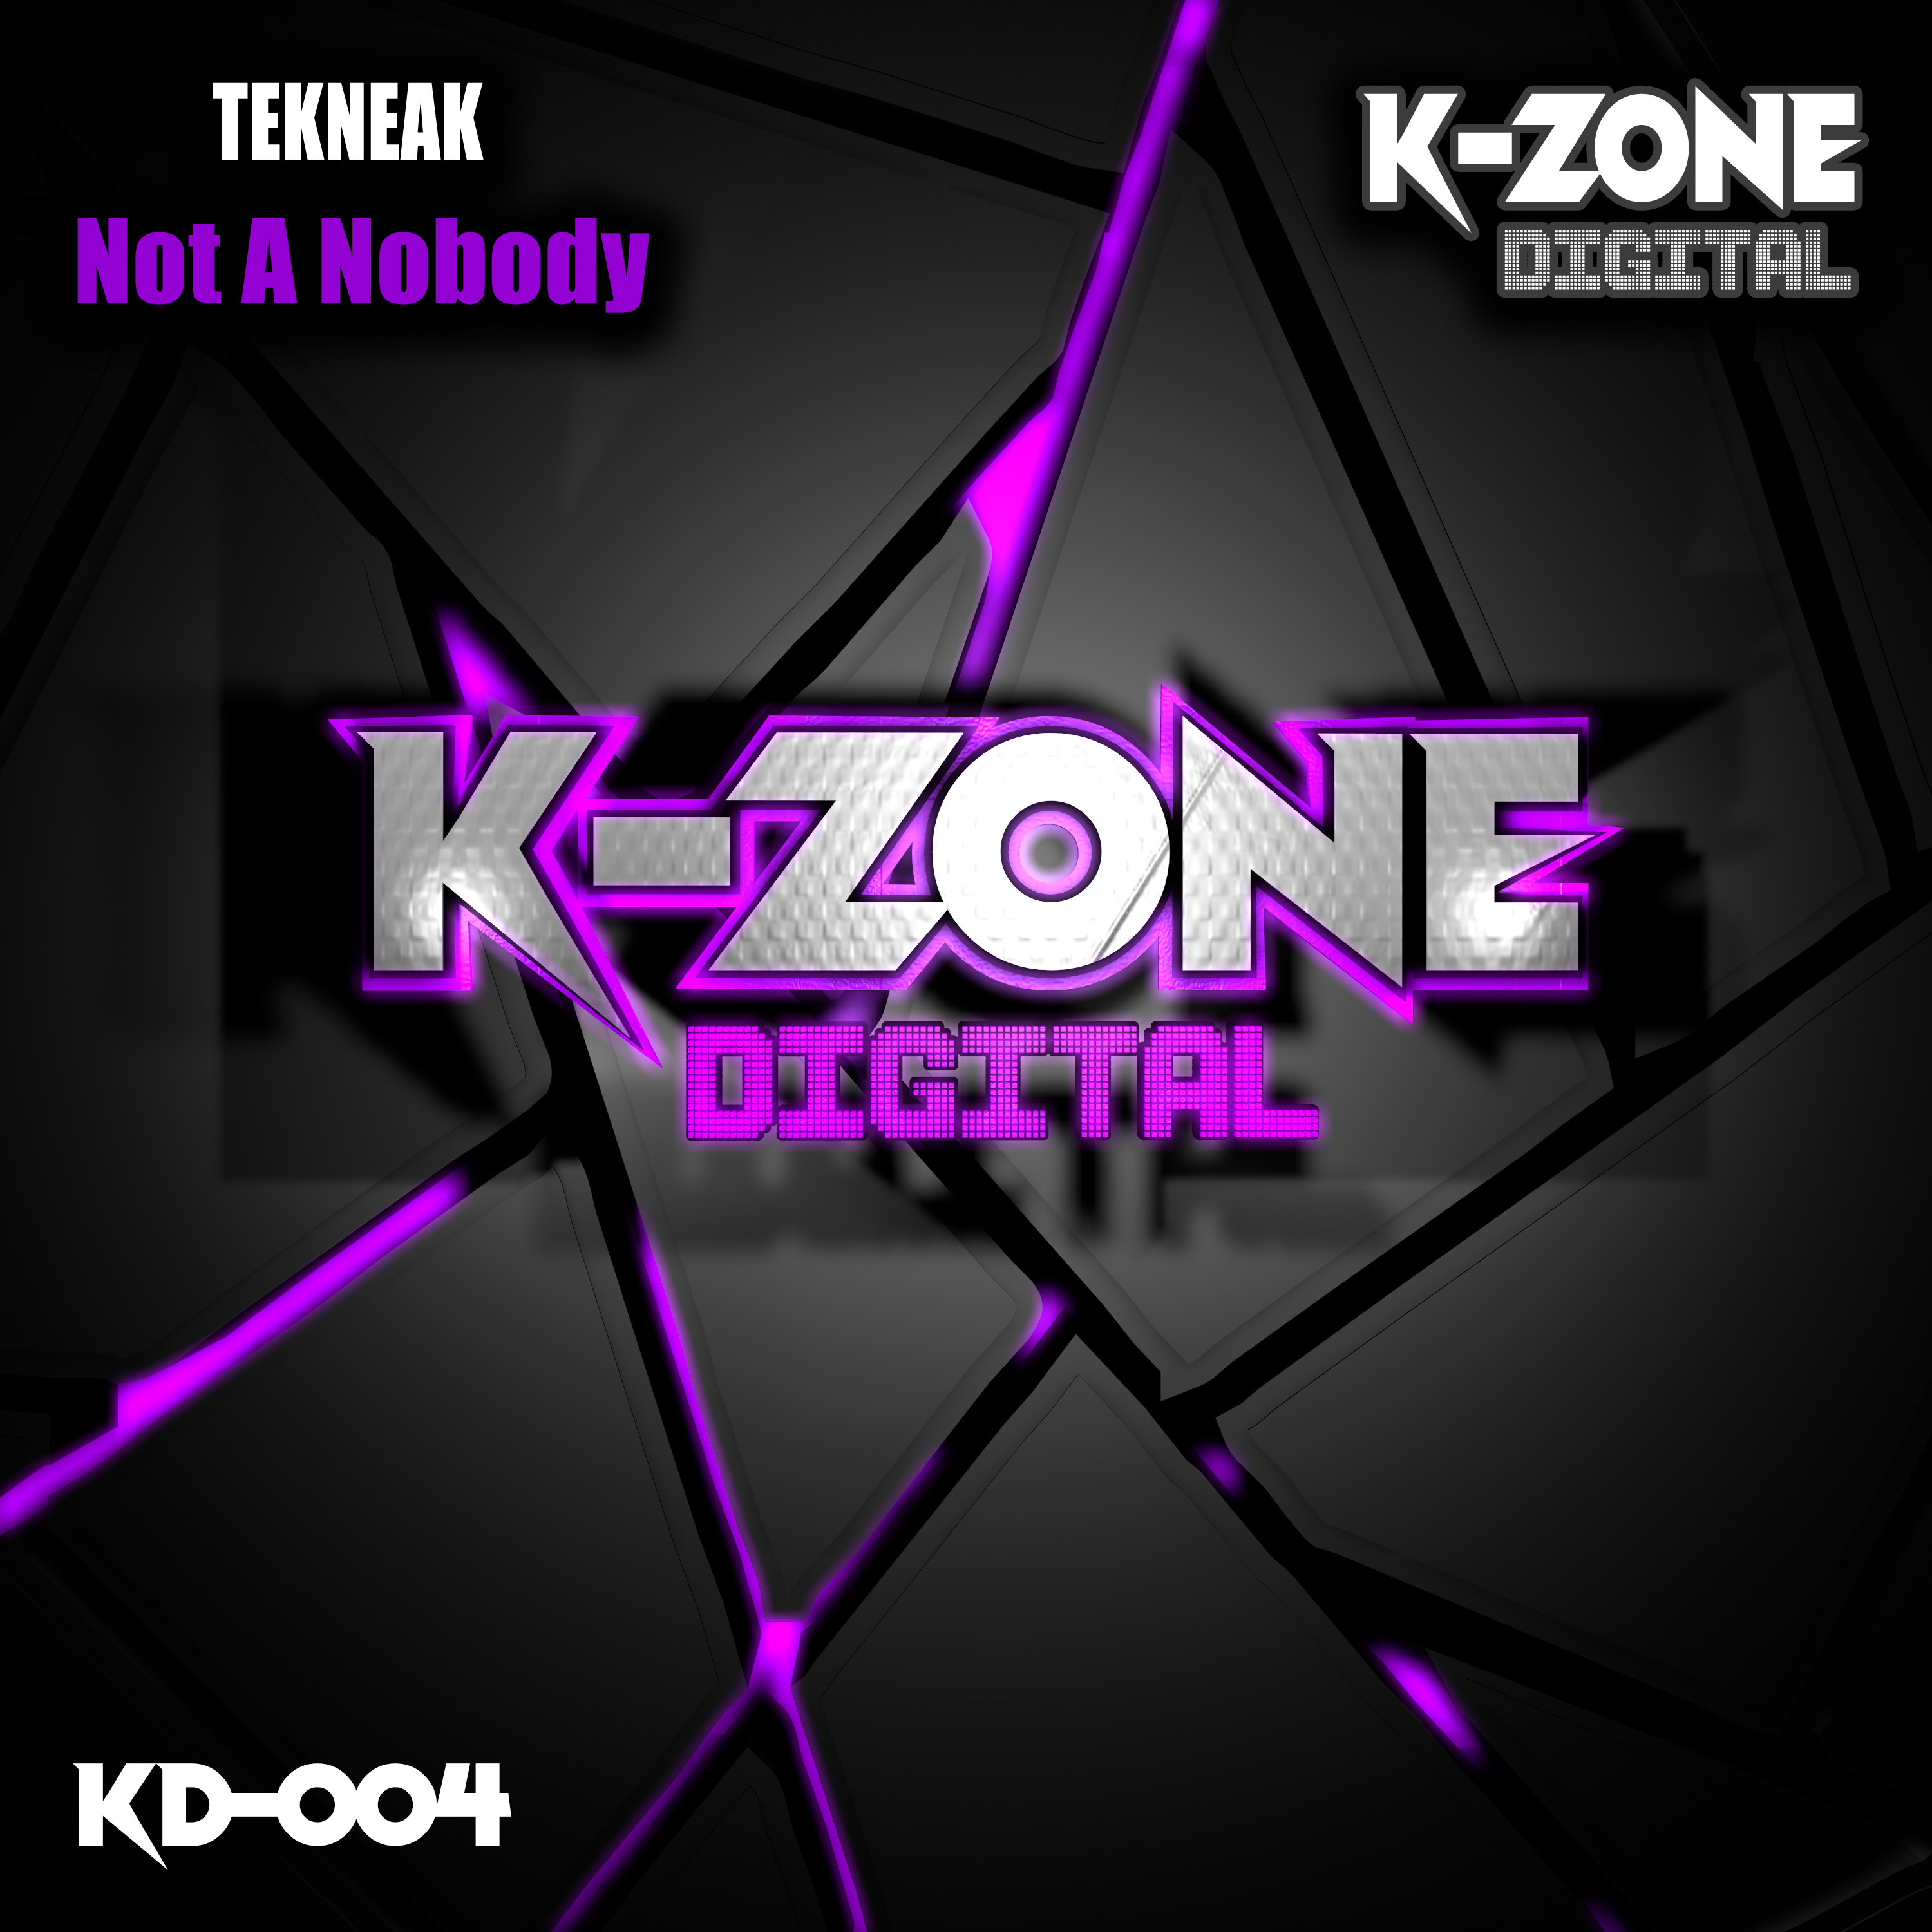 Toolbox Digital Shop We Re Loving The Latest K Zone Digital Release Not A Nobody From Tekneak Check It Out Here Along With The Labels Other Releases T Co Bswipb2vyy Hardhouse Harddance Toolboxdigital Newrelease